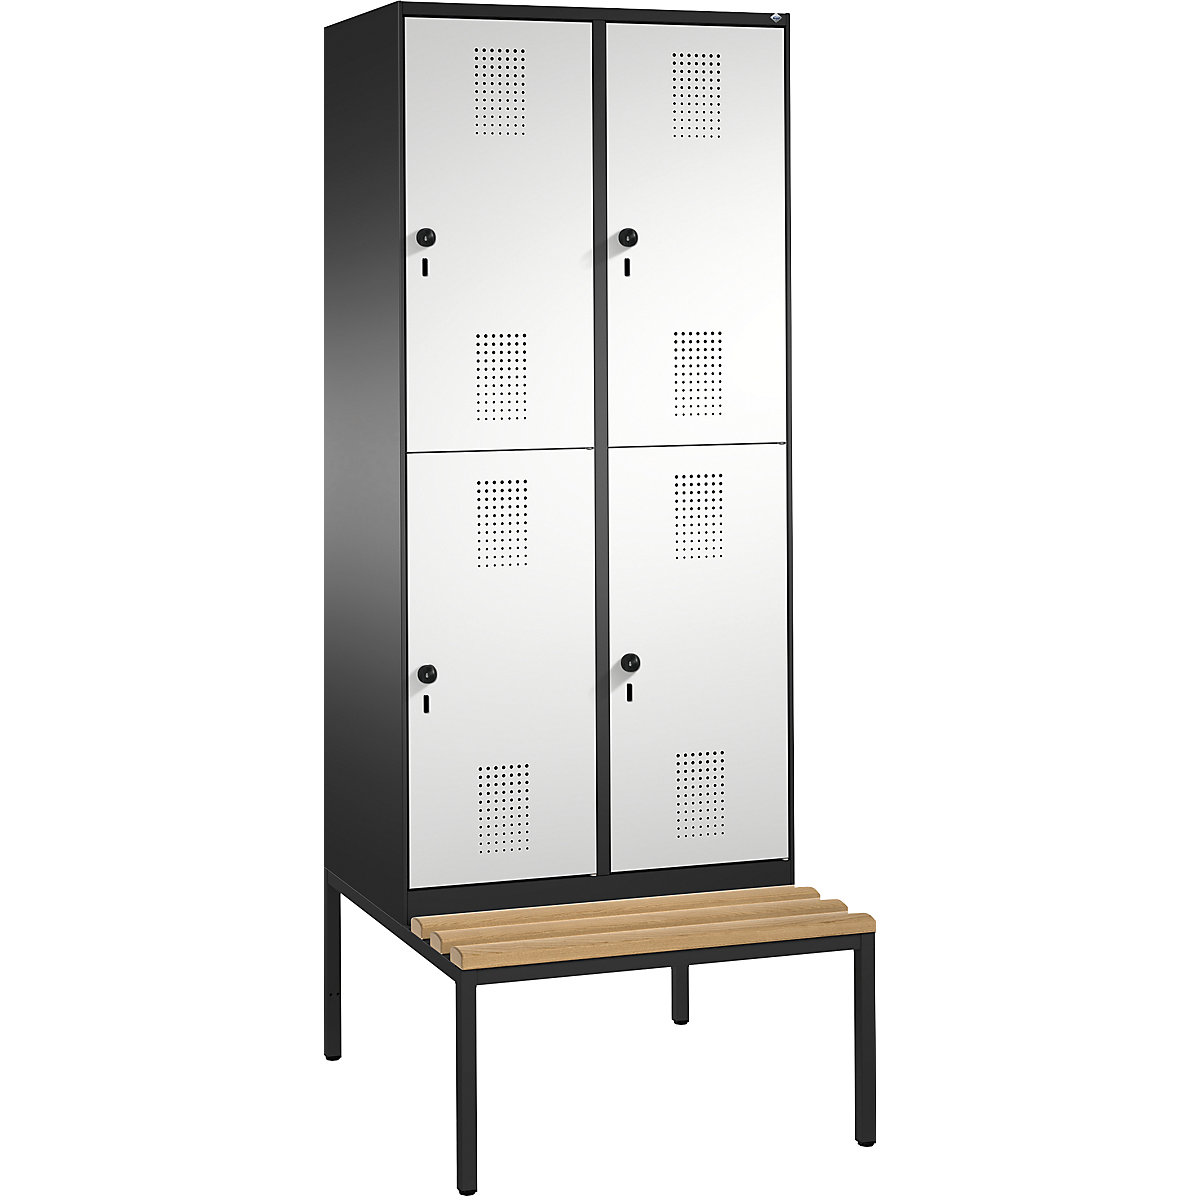 EVOLO cloakroom locker, double tier, with bench – C+P, 2 compartments, 2 shelf compartments each, compartment width 400 mm, black grey / light grey-9